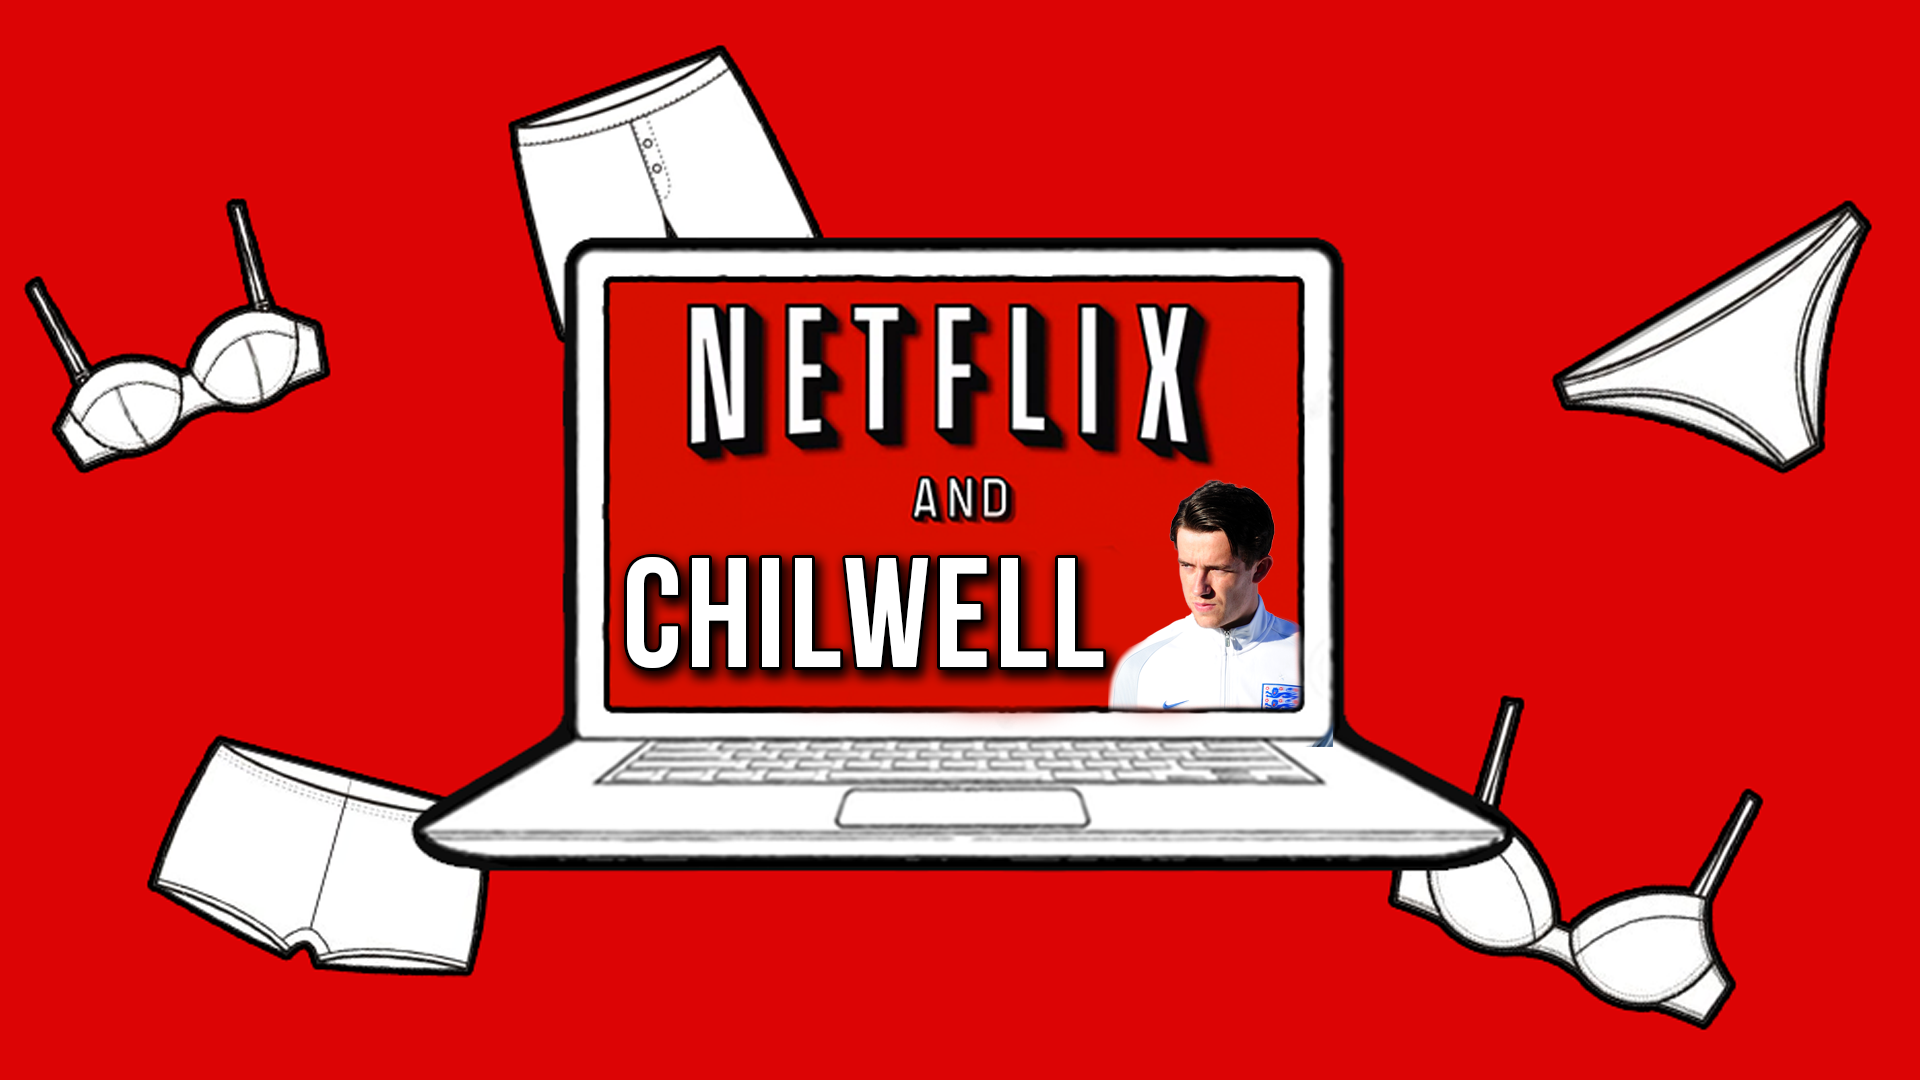 Netflix and Chilwell